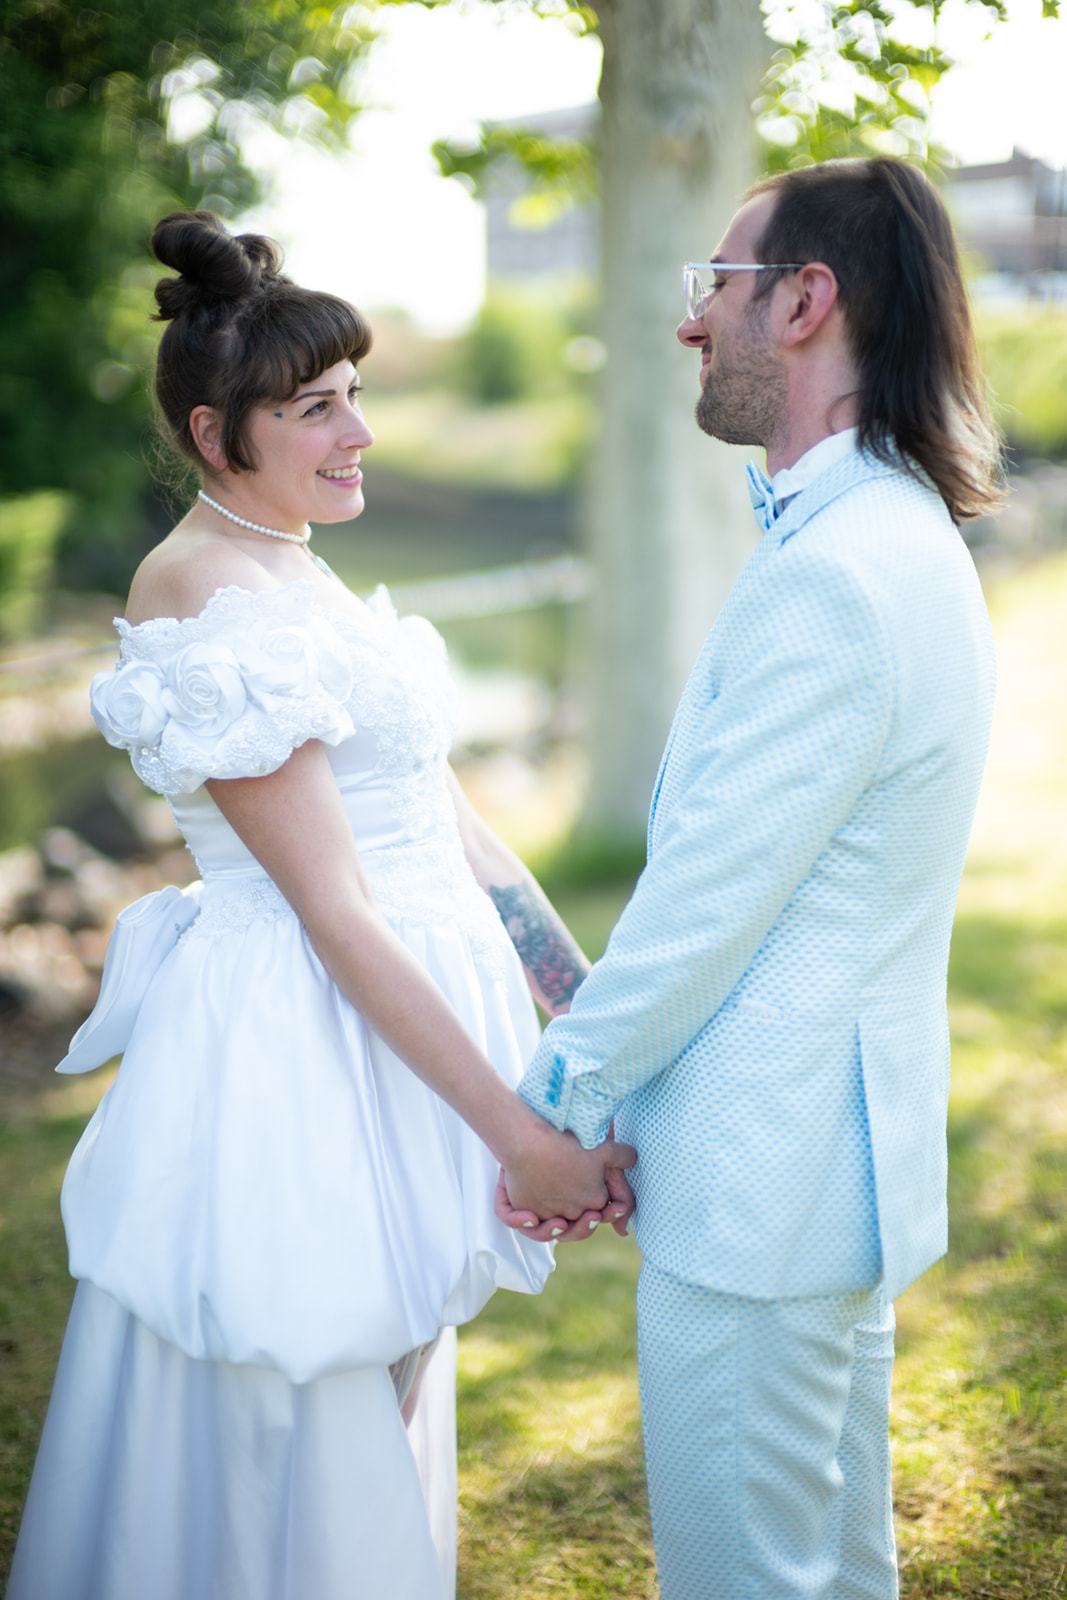 Authentic, candid moment of emotion between bride and groom during their relaxed wedding photo session in Scranton